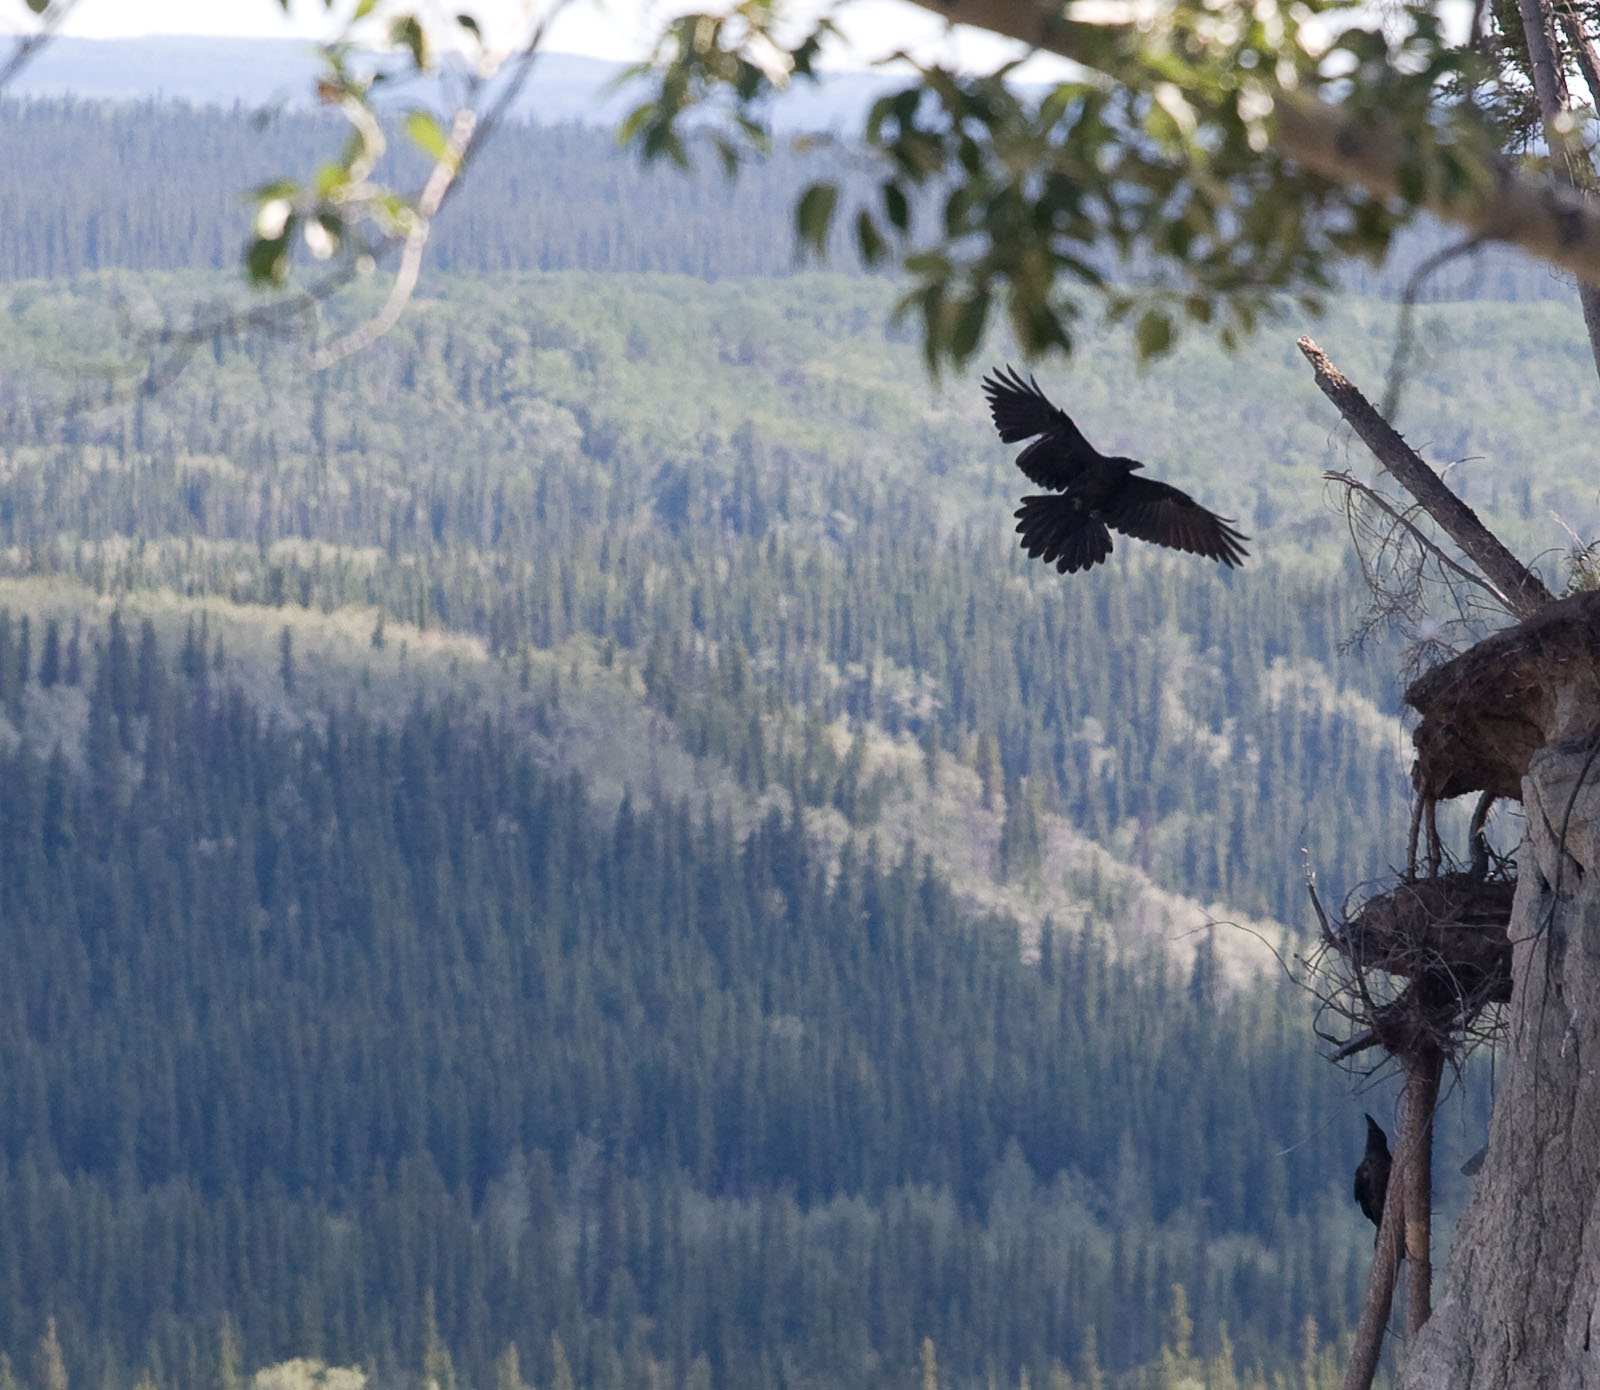 A raven returns to its cliff-side nest along the Copper River. From the Copper River in Alaska.